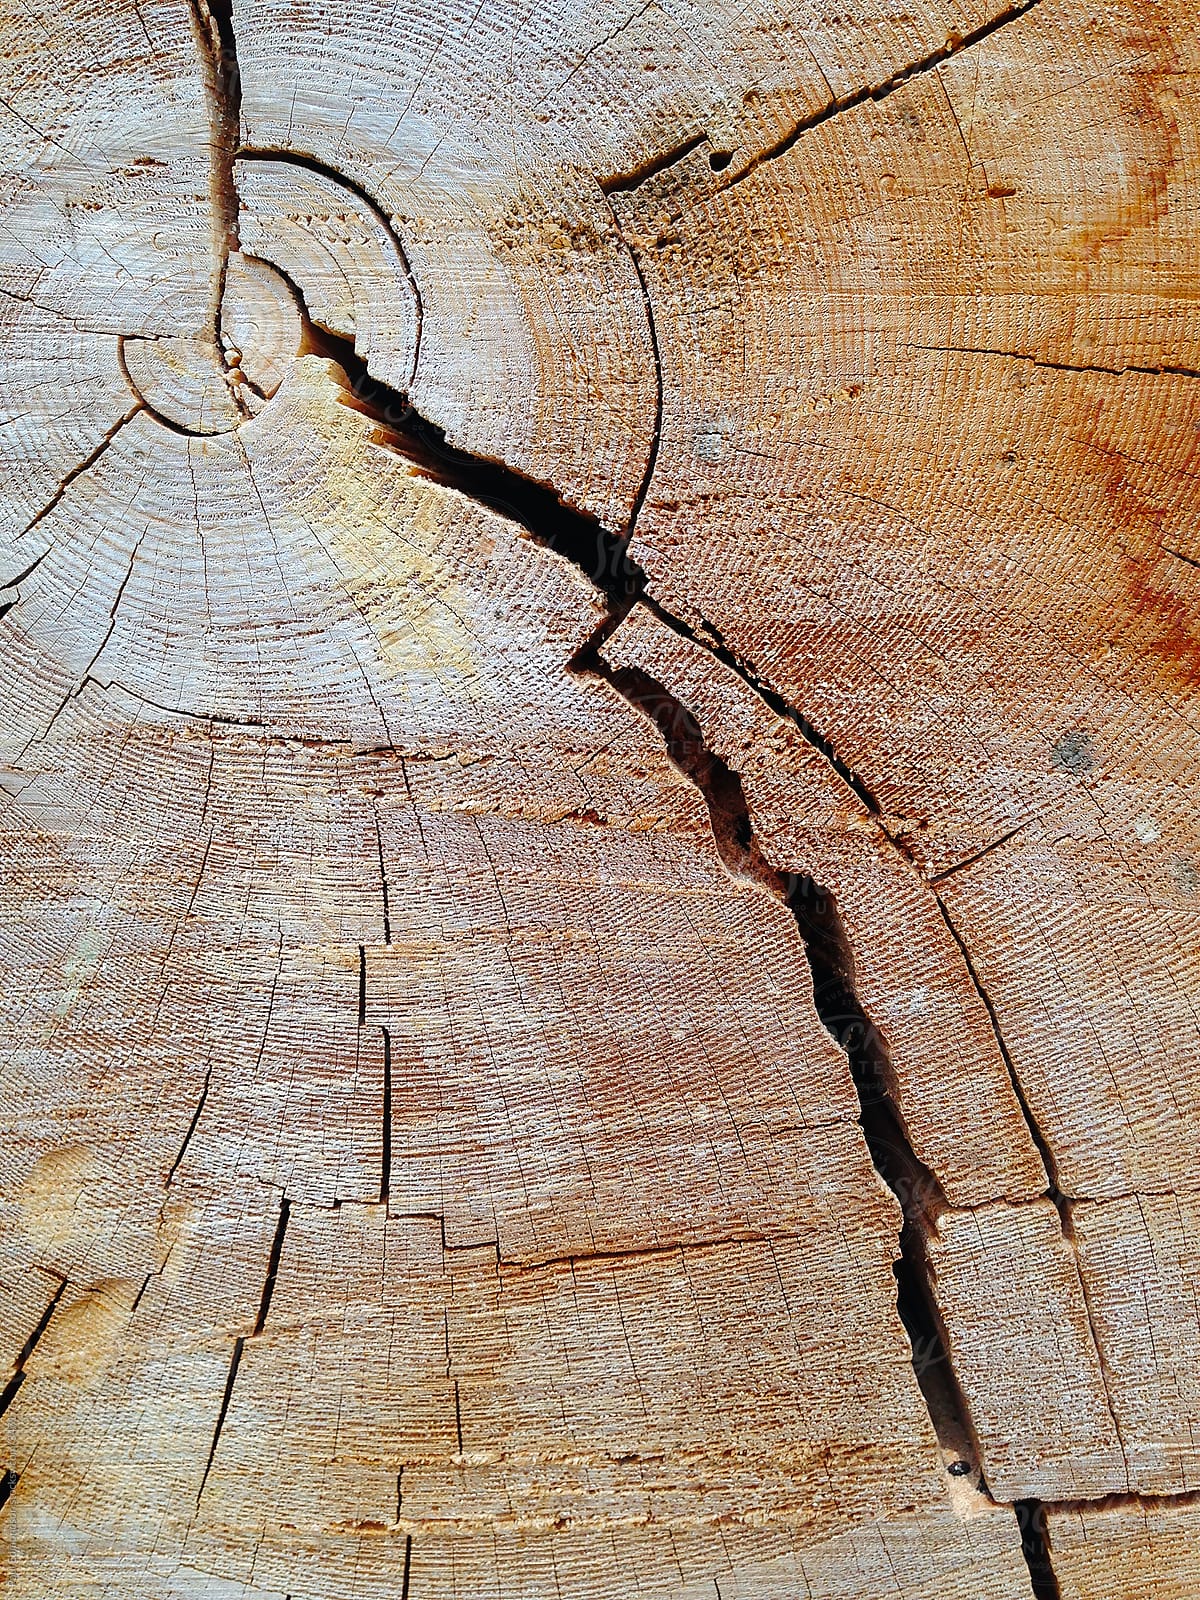 Cross section of old growth Ponderosa pine tree